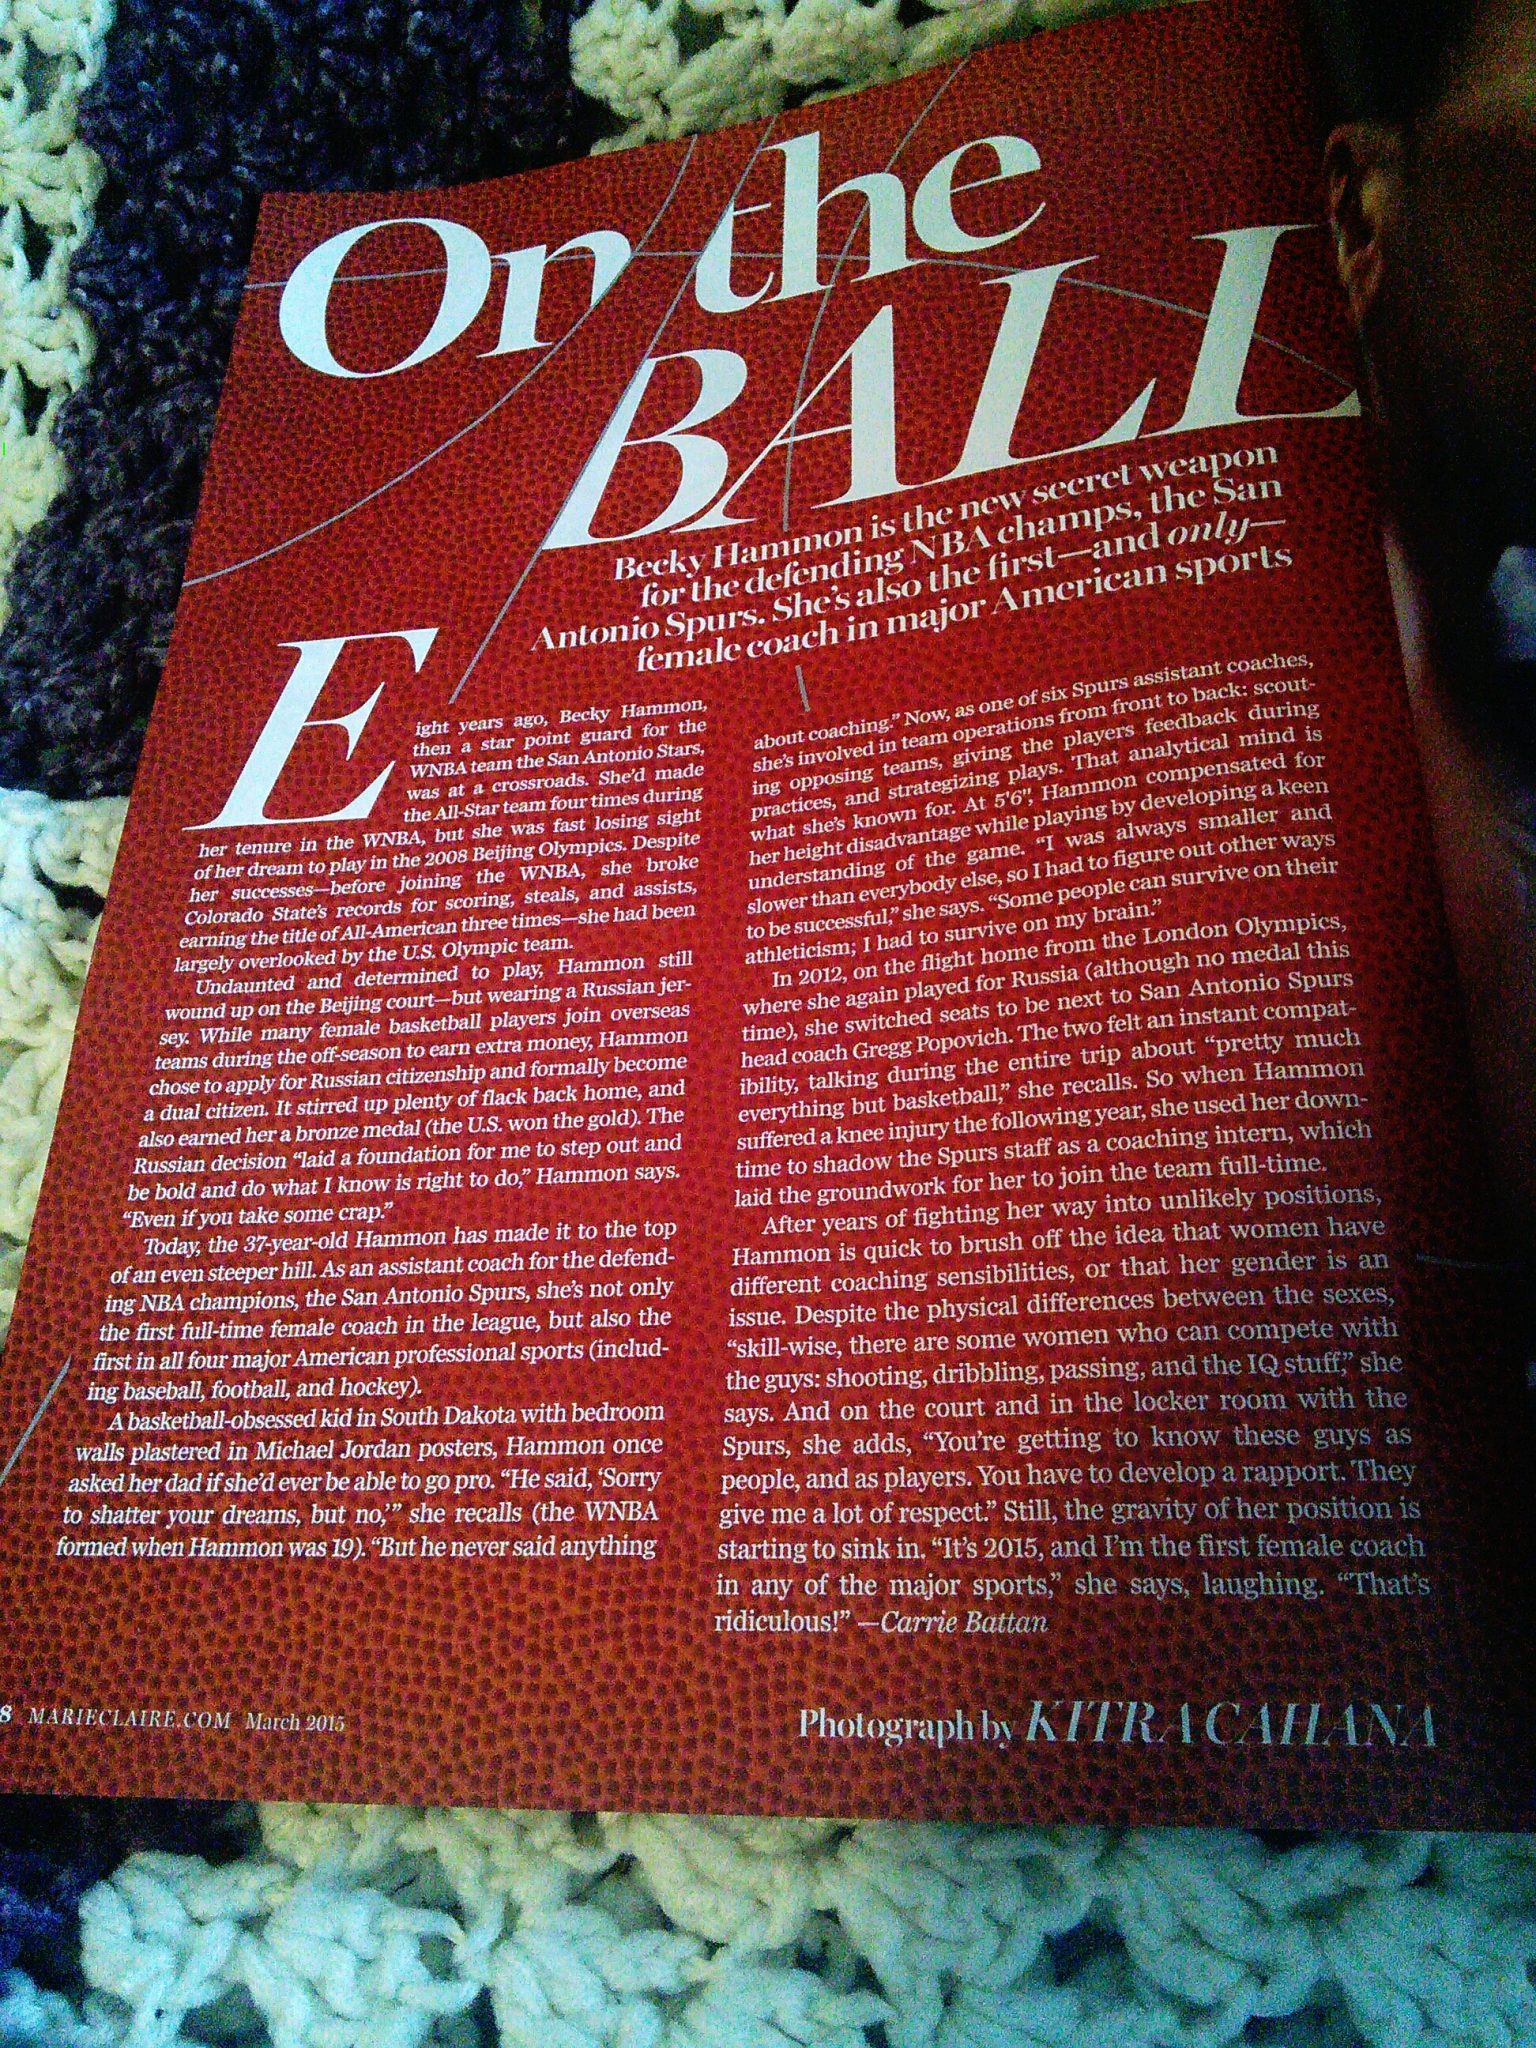 Article in the Marie Claire March 2015 magazine on Becky Hammon, first female coach in NBA & in any major sport.